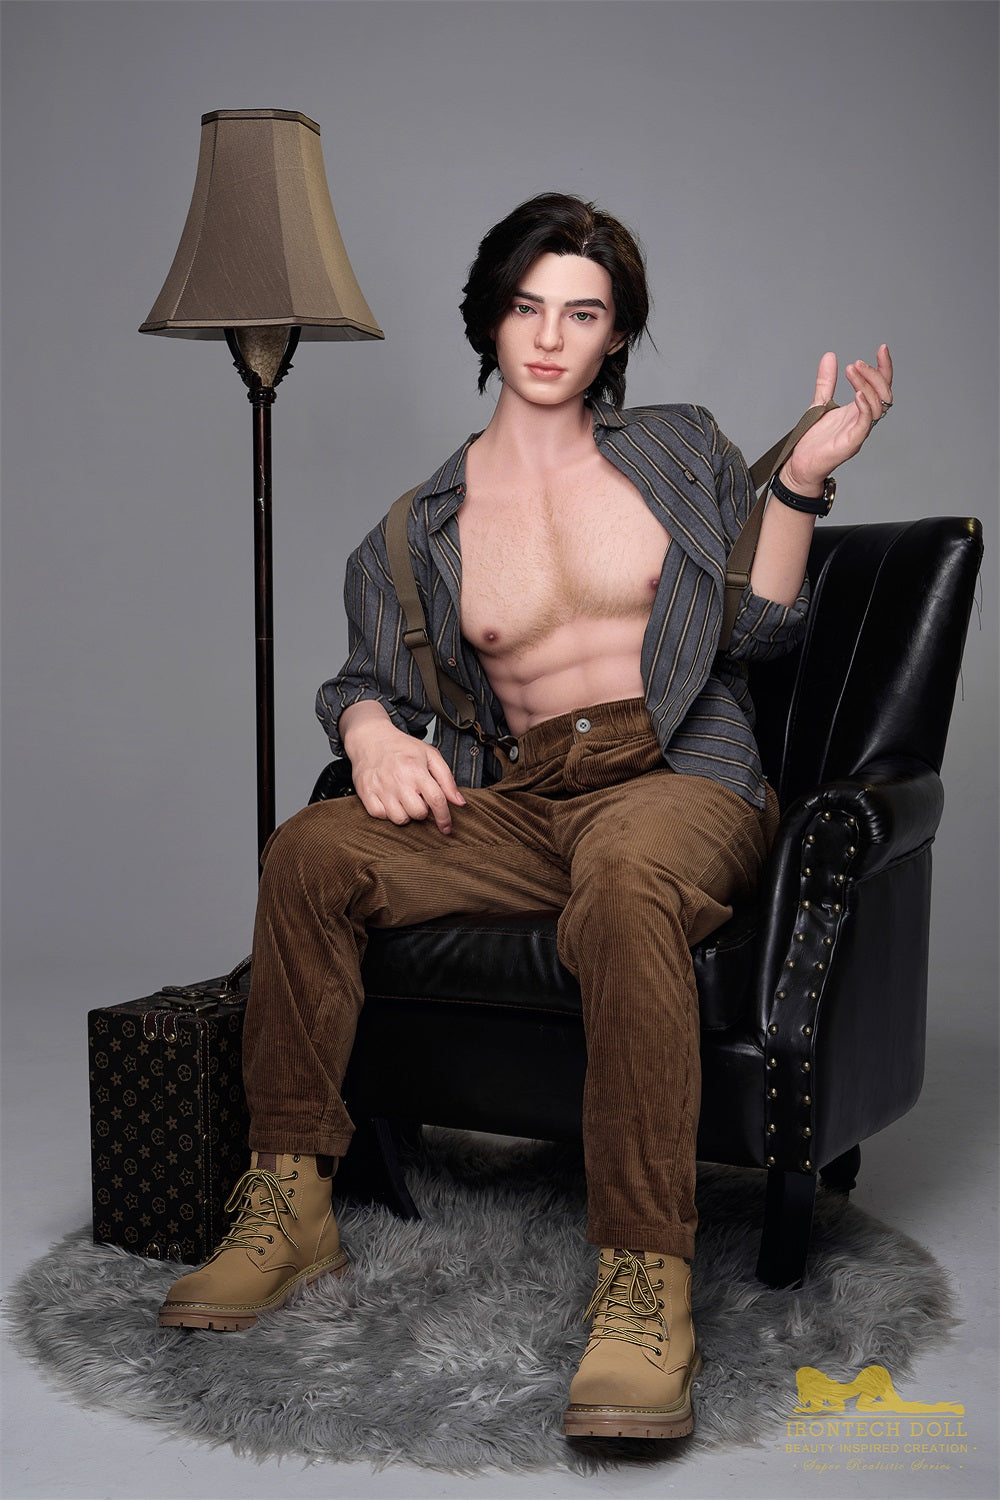 Irontechdoll 170cm M9 Lucas Male Sex Doll Full Silicone Male Doll Gay Love Doll